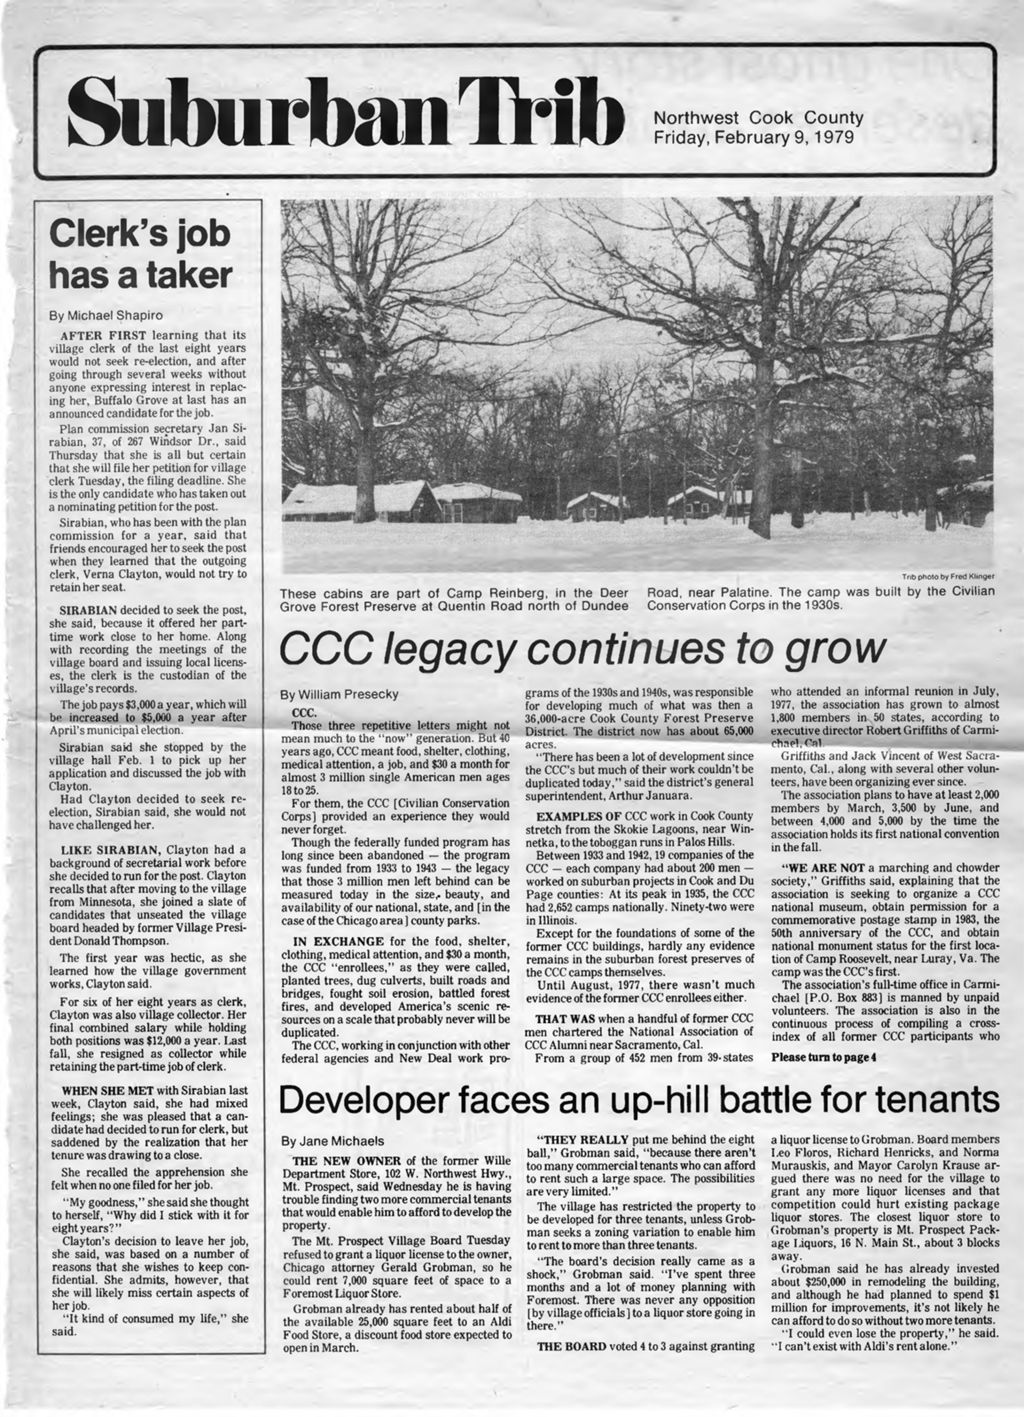 Suburban Trib, "CCC legacy continues to grow by William Presecky," 1979